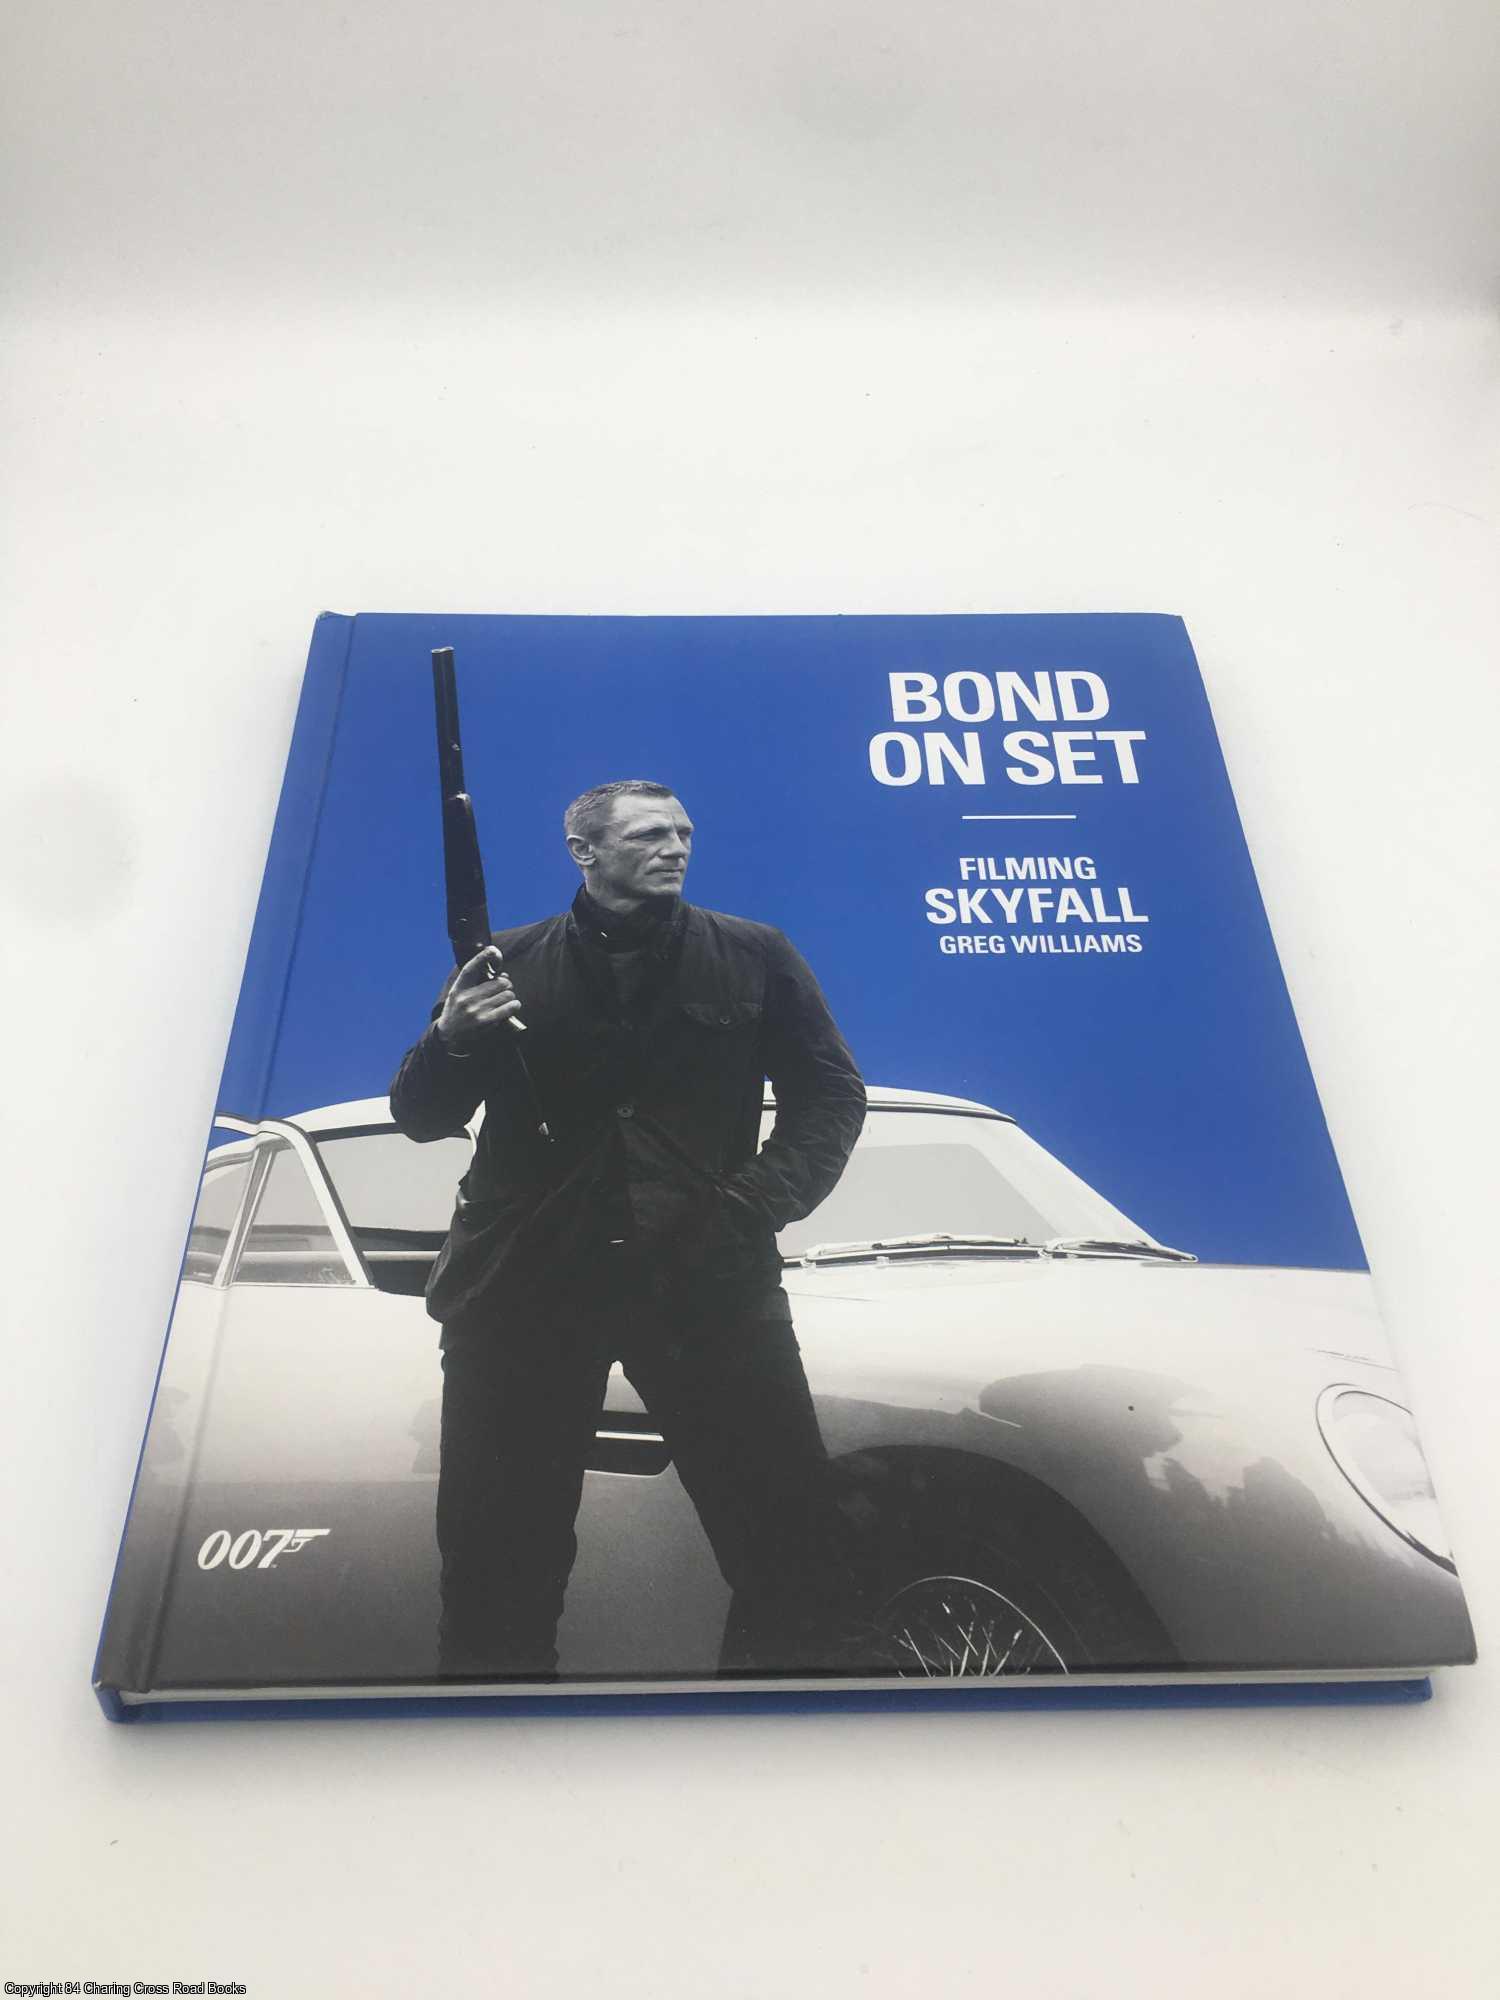 Bond On Set Filming Skyfall: 007 by Greg Williams on 84 Charing Cross Rare  Books